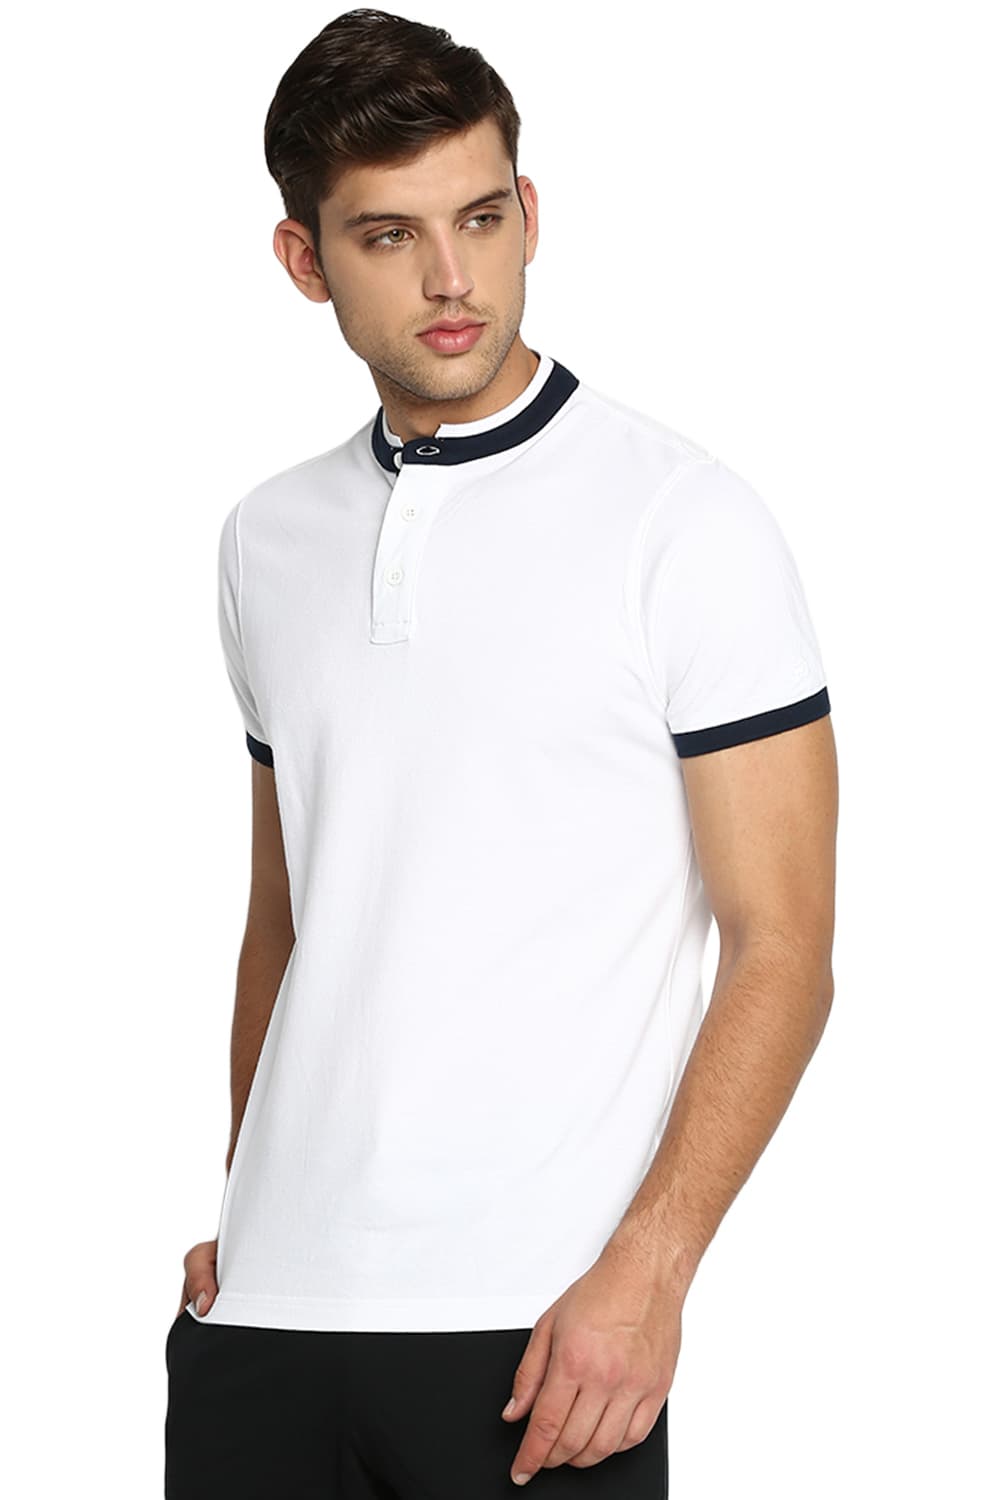 BASICS MUSCLE FIT STAND UP COLLAR POLO T SHIRT